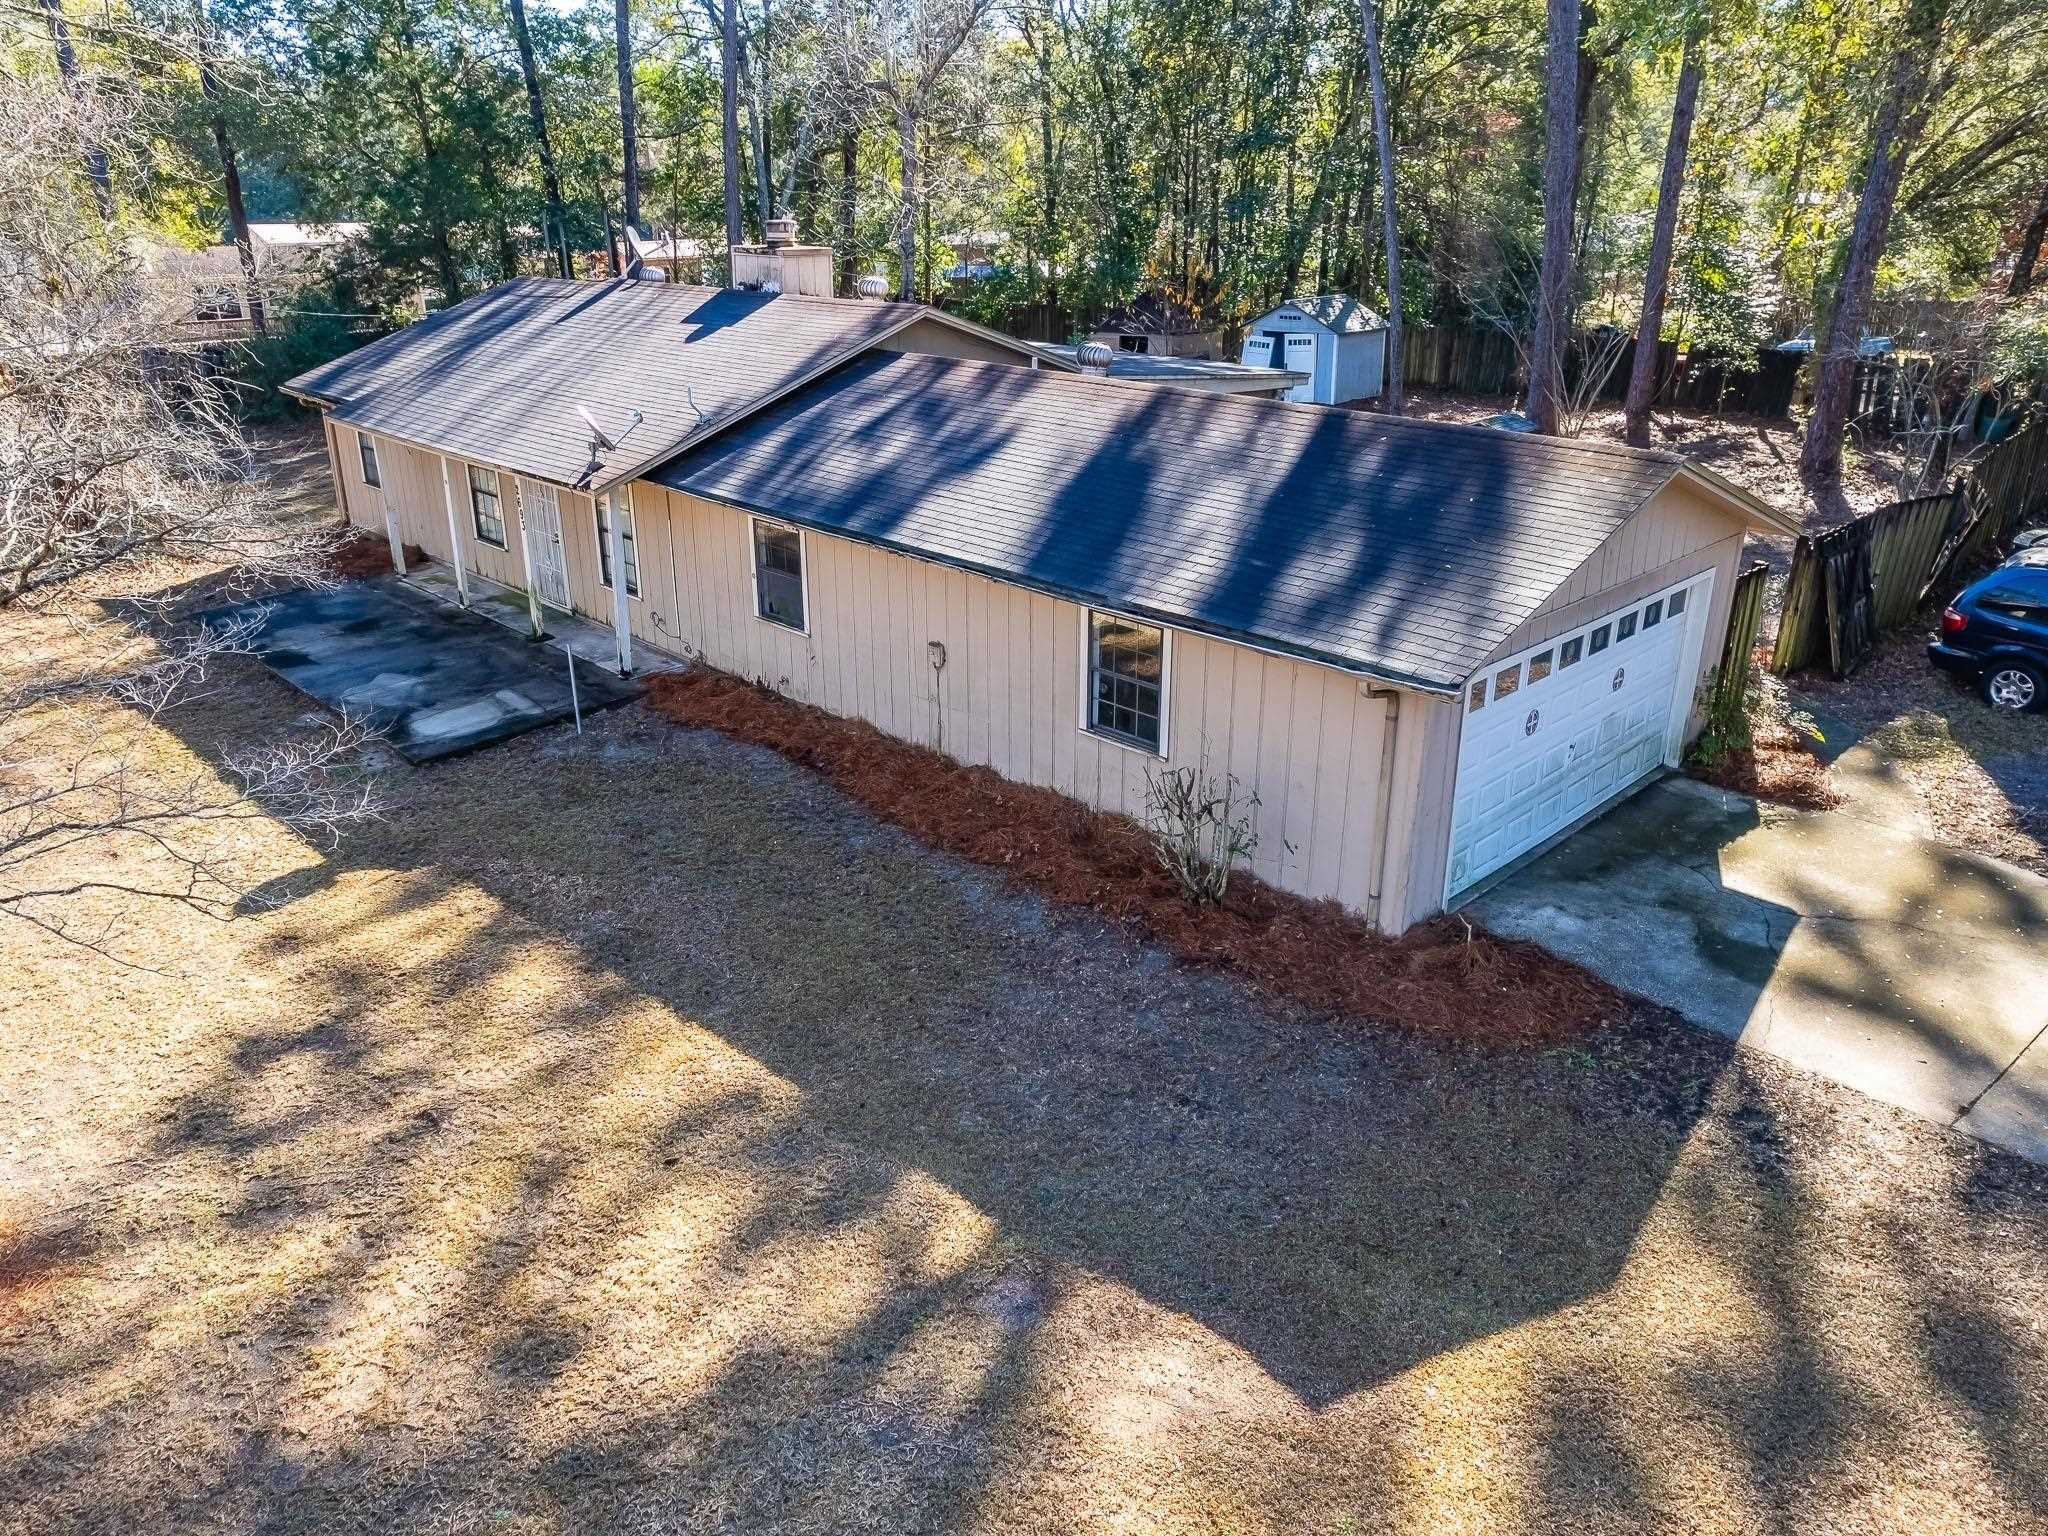 2693 Glover Road,TALLAHASSEE,Florida 32305,3 Bedrooms Bedrooms,2 BathroomsBathrooms,Detached single family,2693 Glover Road,367488